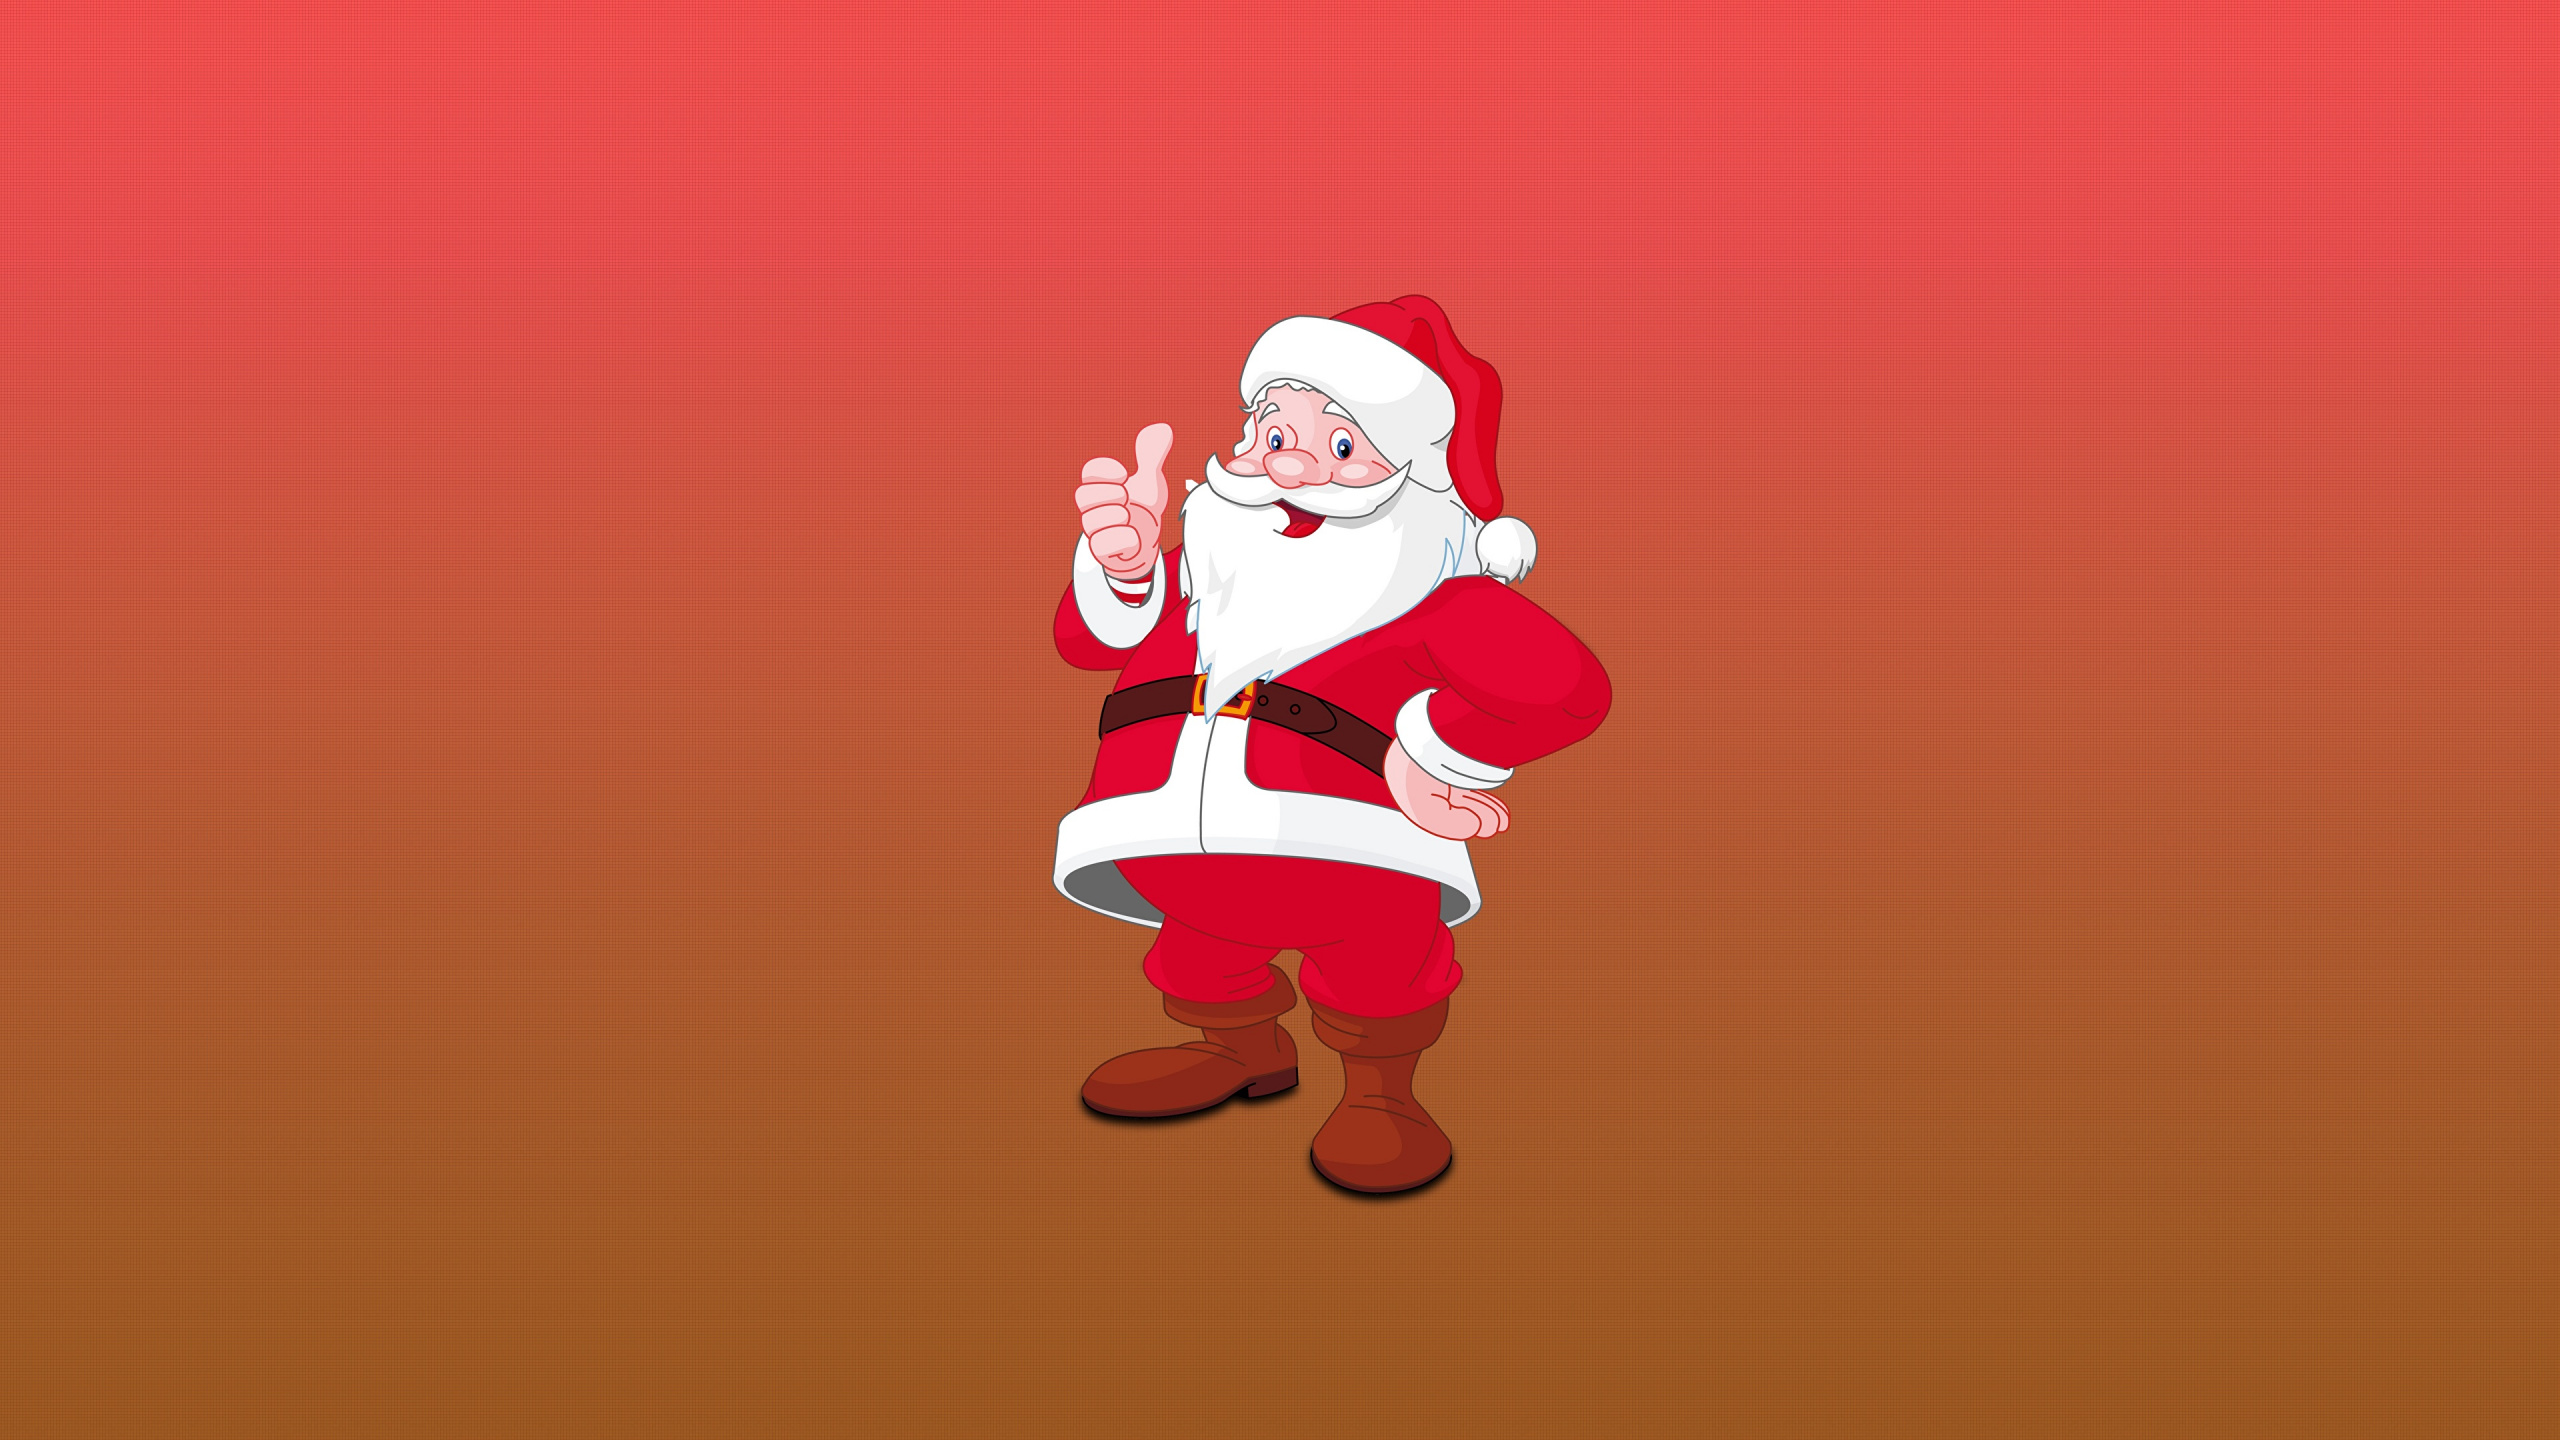 Santa Claus, Illustration, Ded Moroz, Christmas Day, Red. Wallpaper in 2560x1440 Resolution